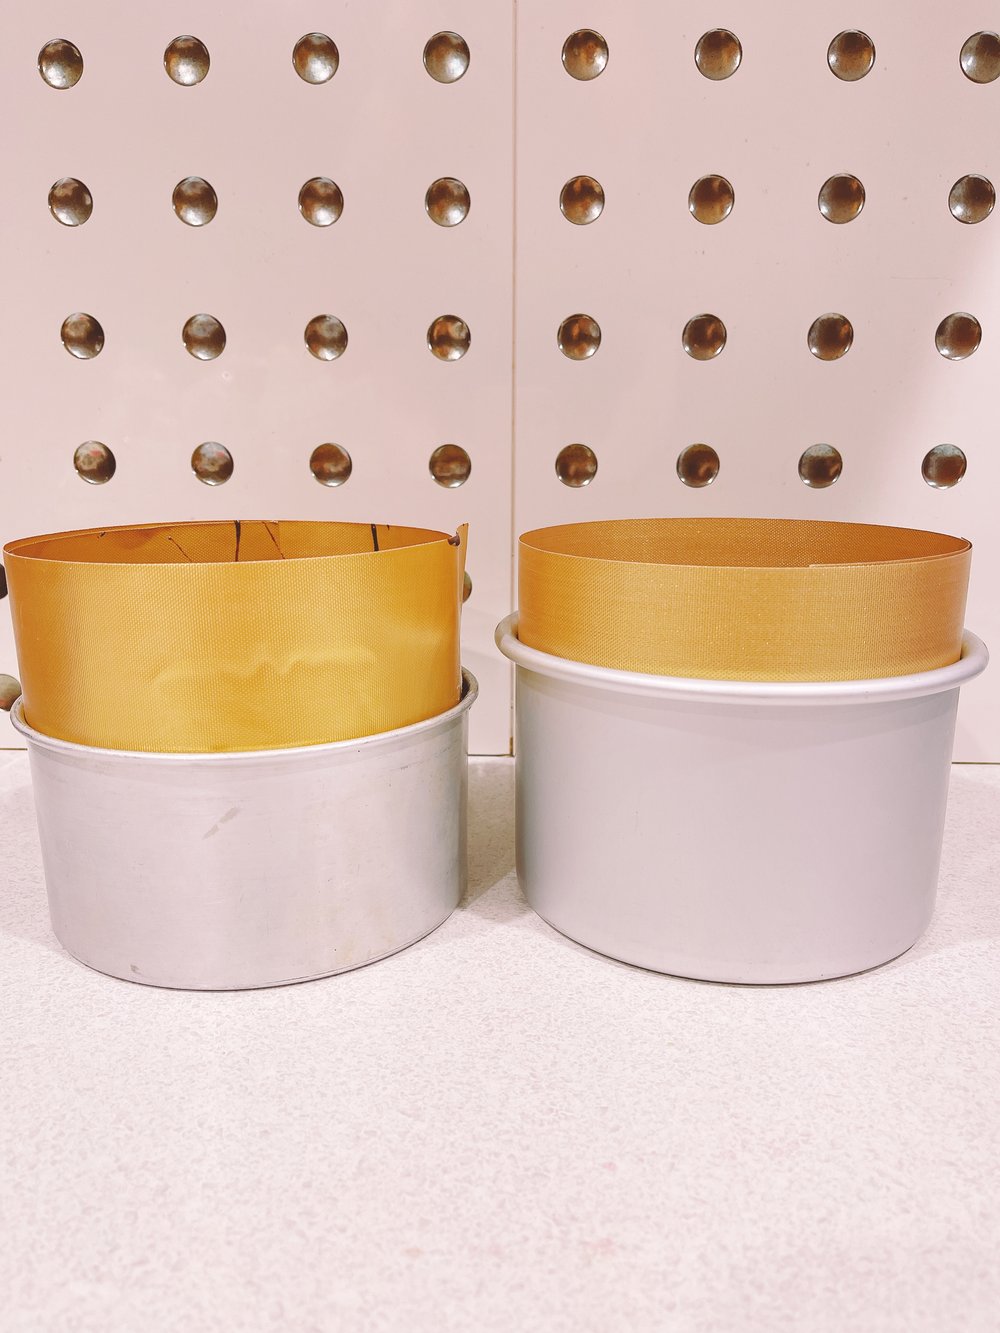 MORE LINER 9inch Round Reusable Cake Tin Liner